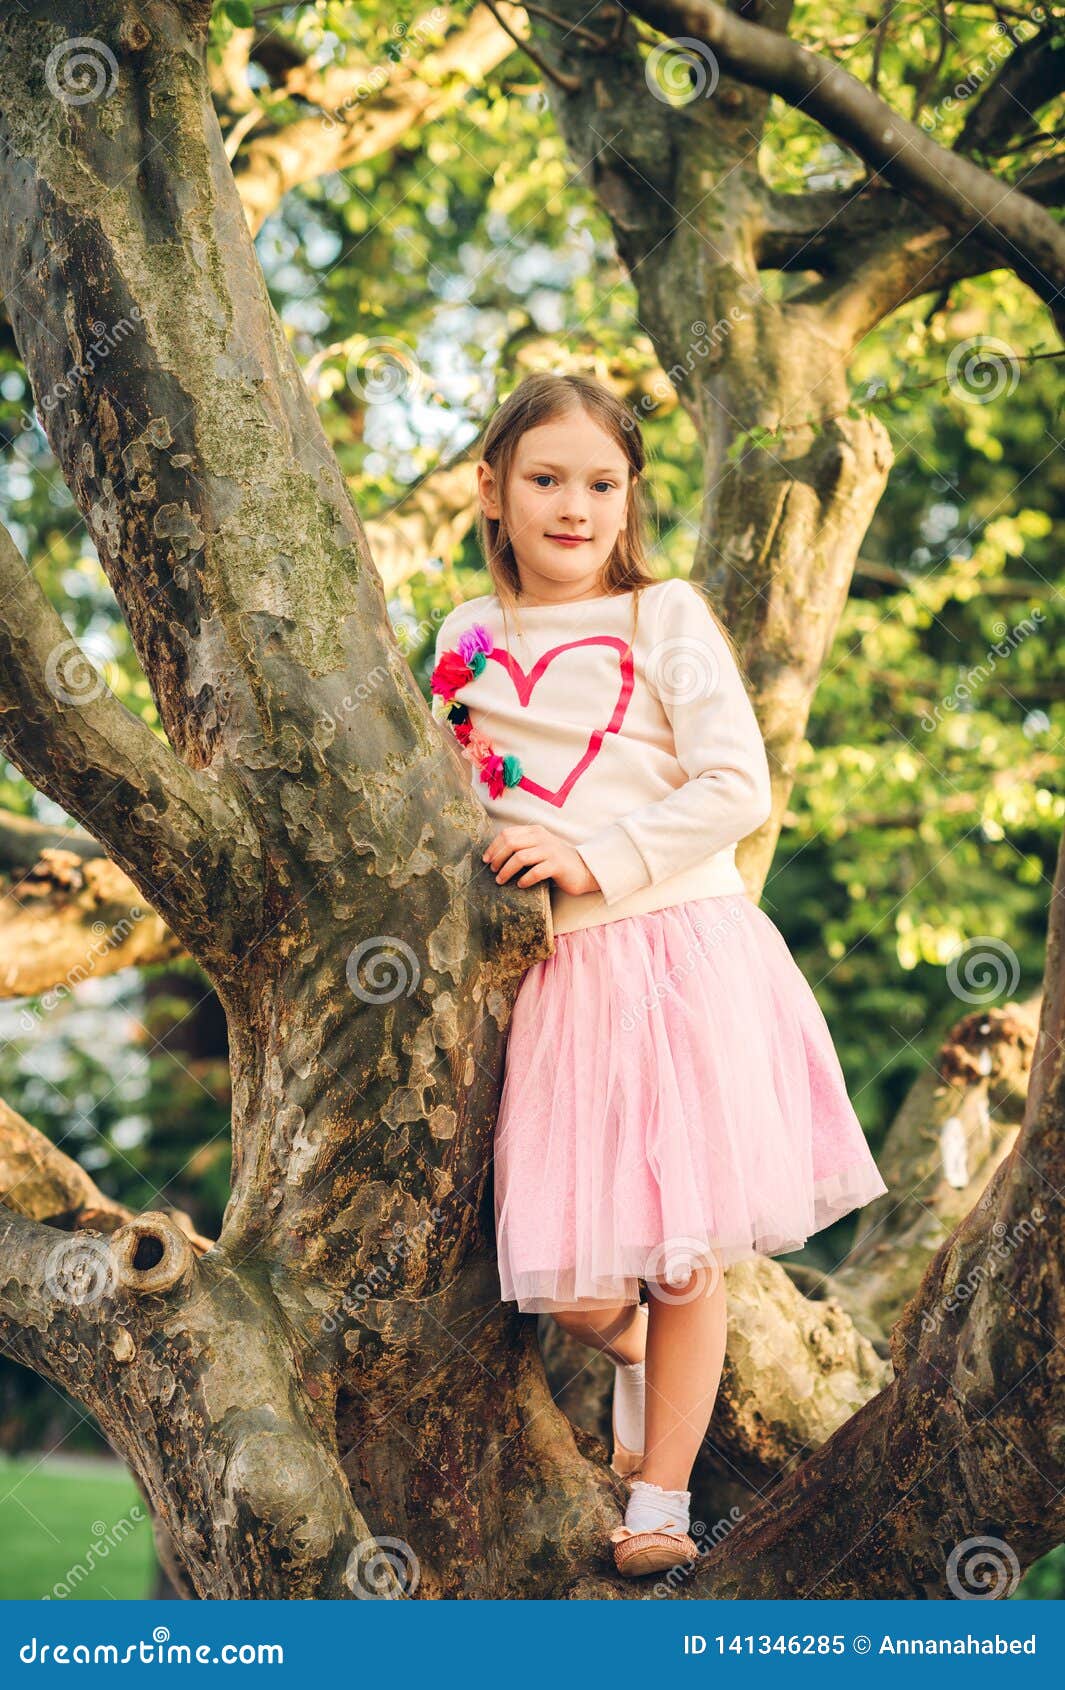 Fashion Portrait Of A Cute Little Girl Of 7 Years Old Stock Image